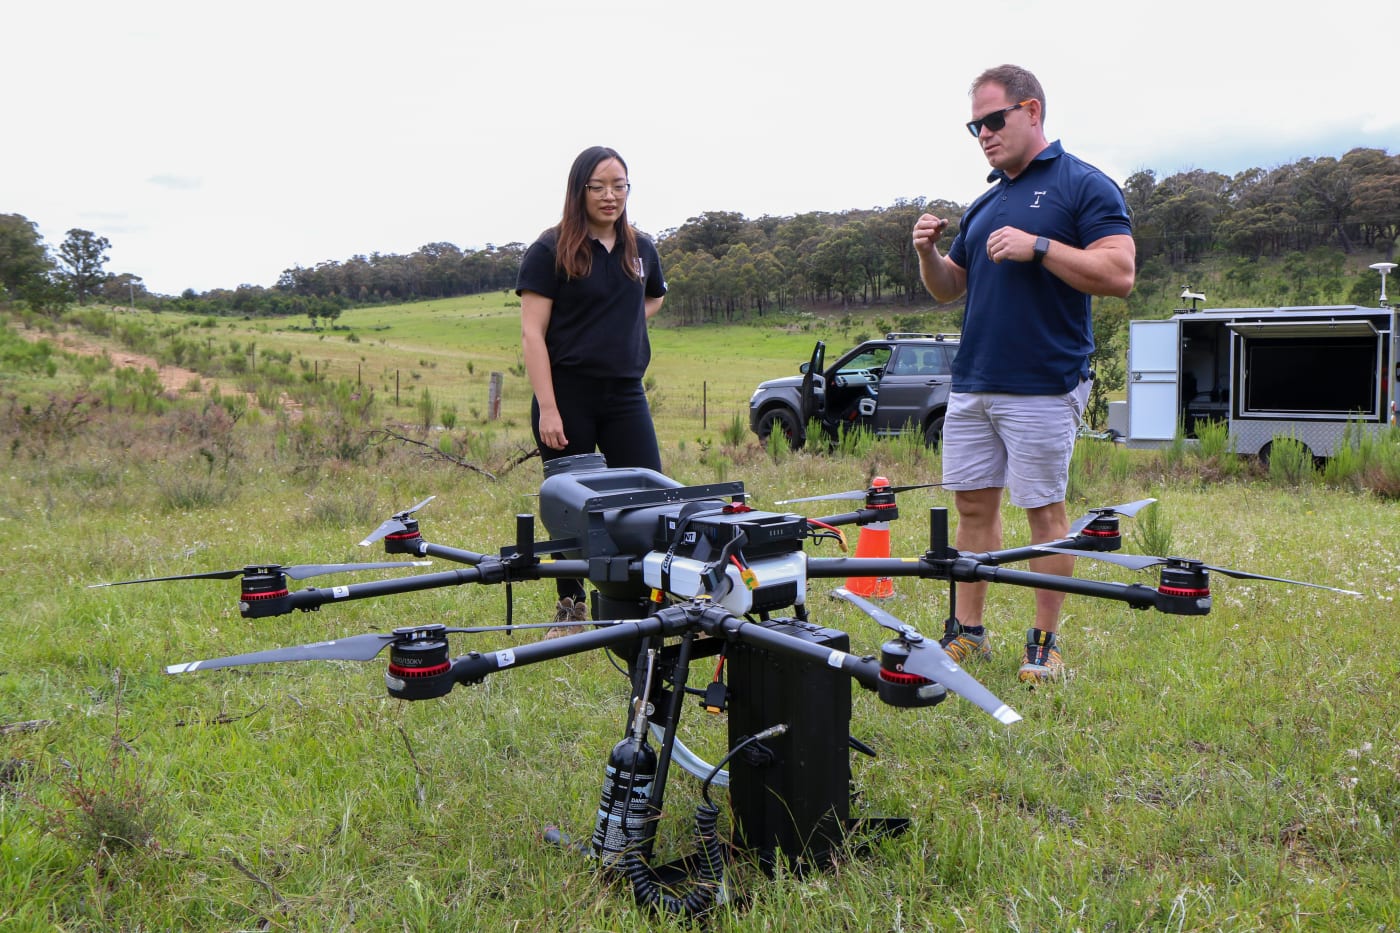 Andrew Walker, founder and CEO of AirSeed Technologies shows us how drone seeding works